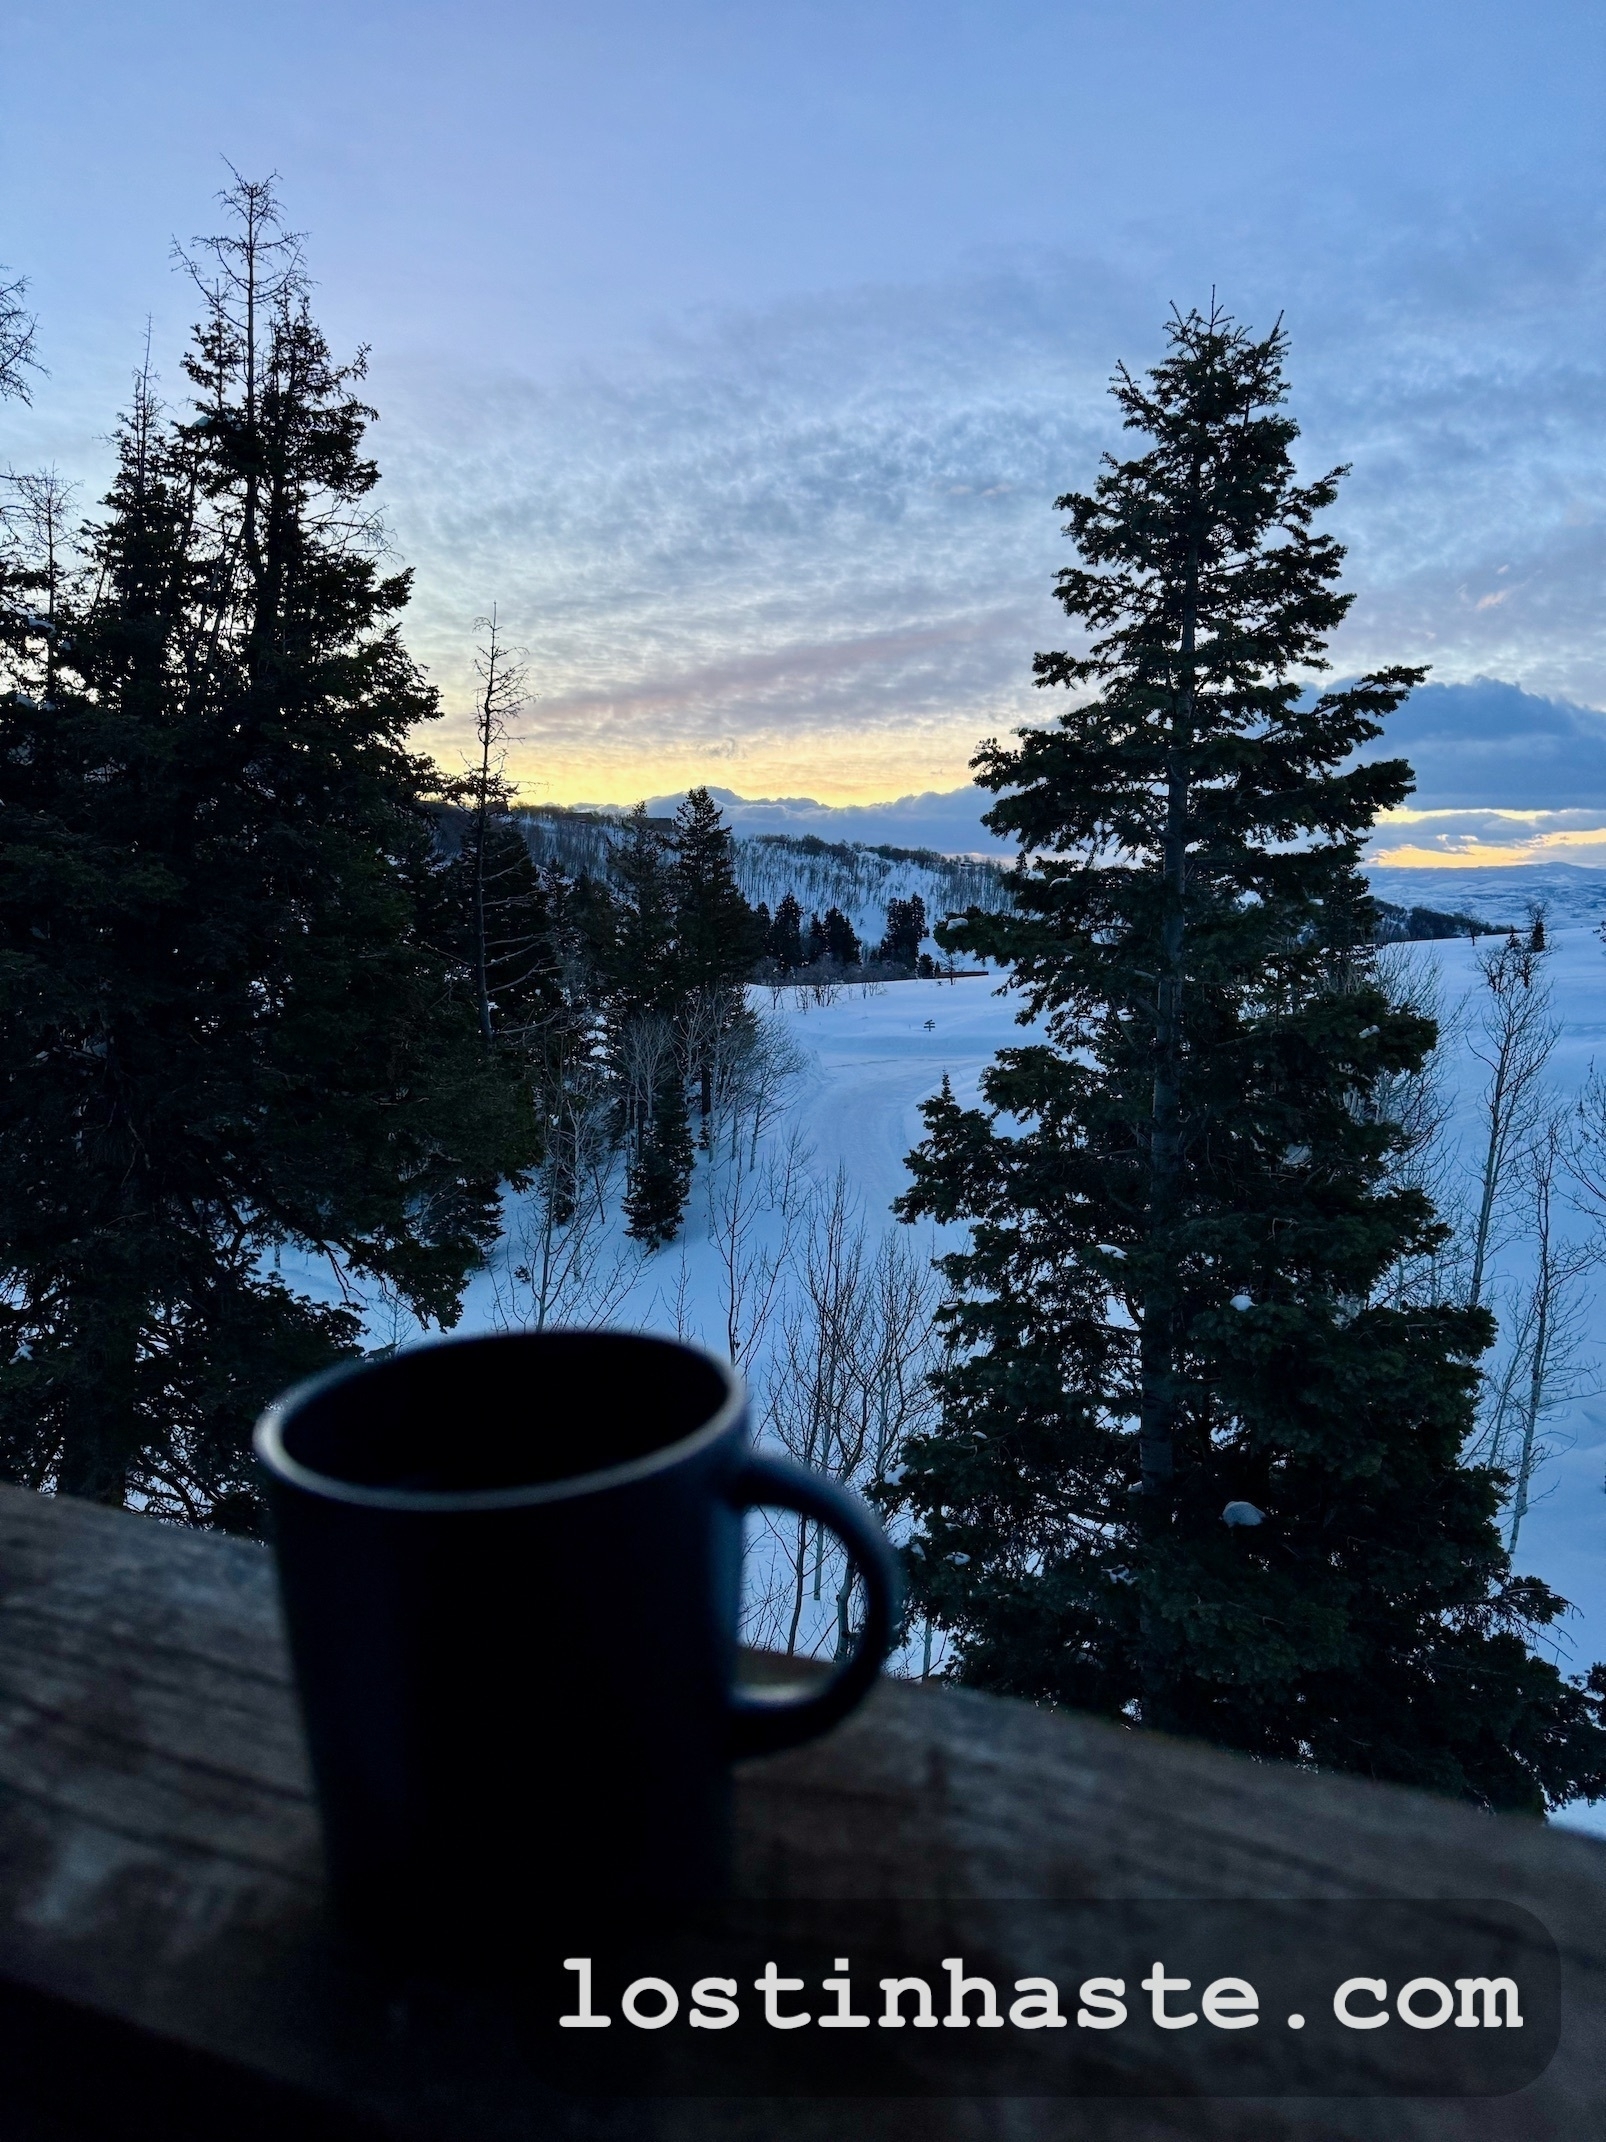 A mug rests on a wooden rail overlooking a snow-covered landscape with evergreen trees and a colorful sunrise sky. Text: lostinhaste.com